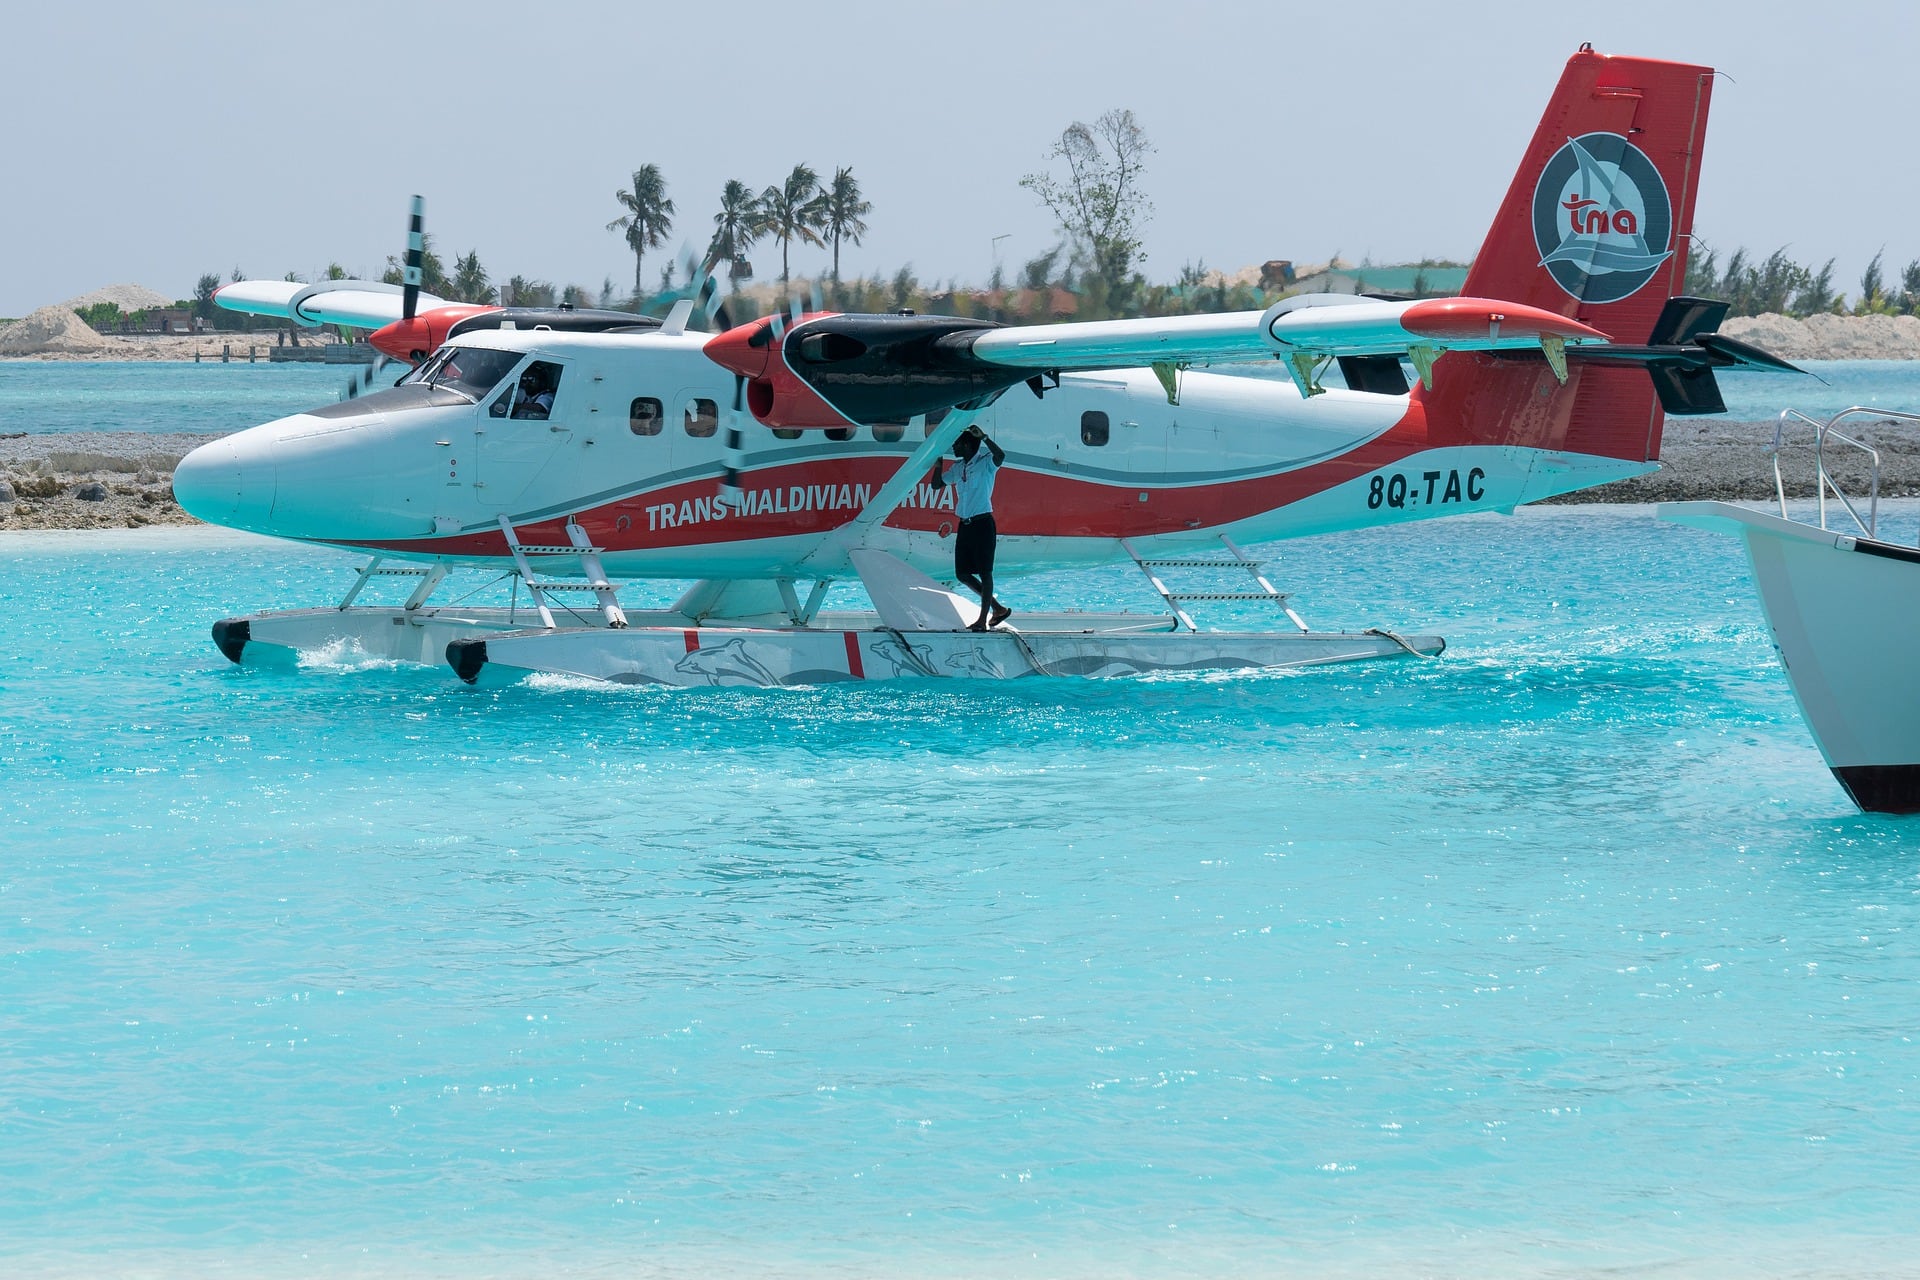 Seaplanes or Speedboats in the Maldives - which is better?